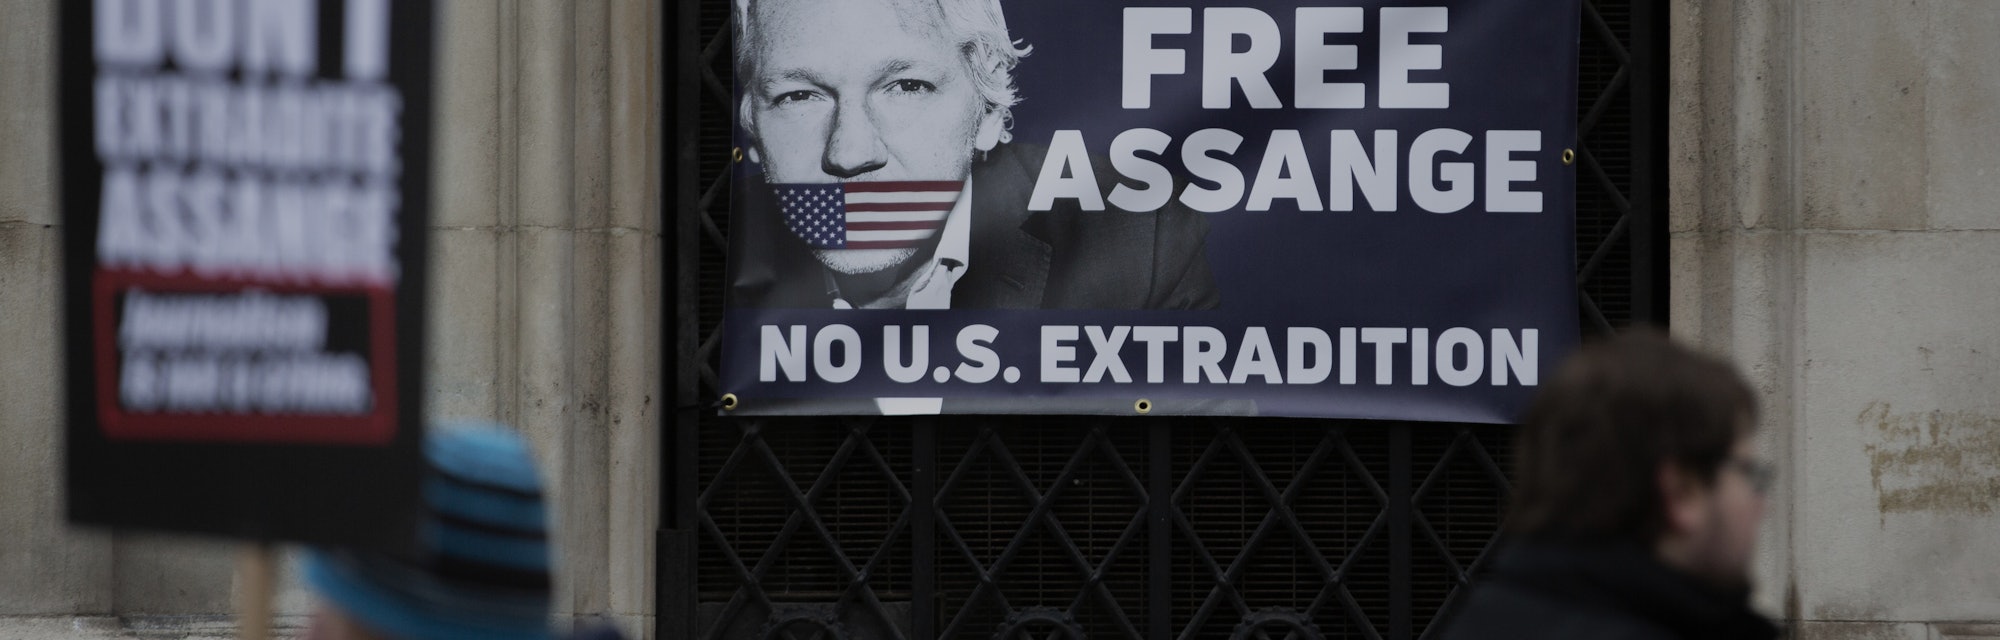 LONDON, UNITED KINGDOM - JANUARY 24: Supporters of Julian Assange stage a demonstration in front of ...